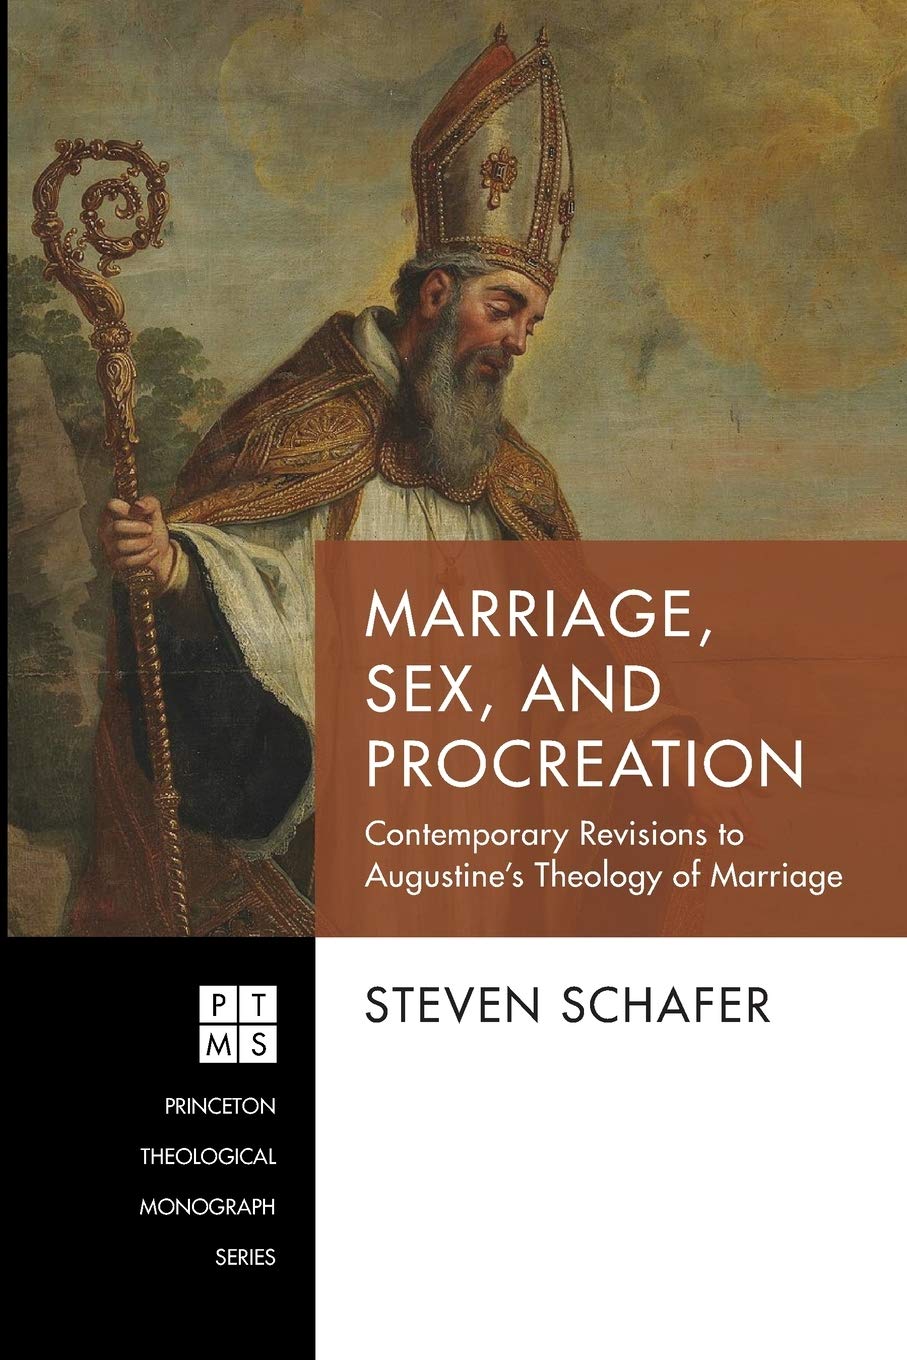 Same sex marriage and procreation